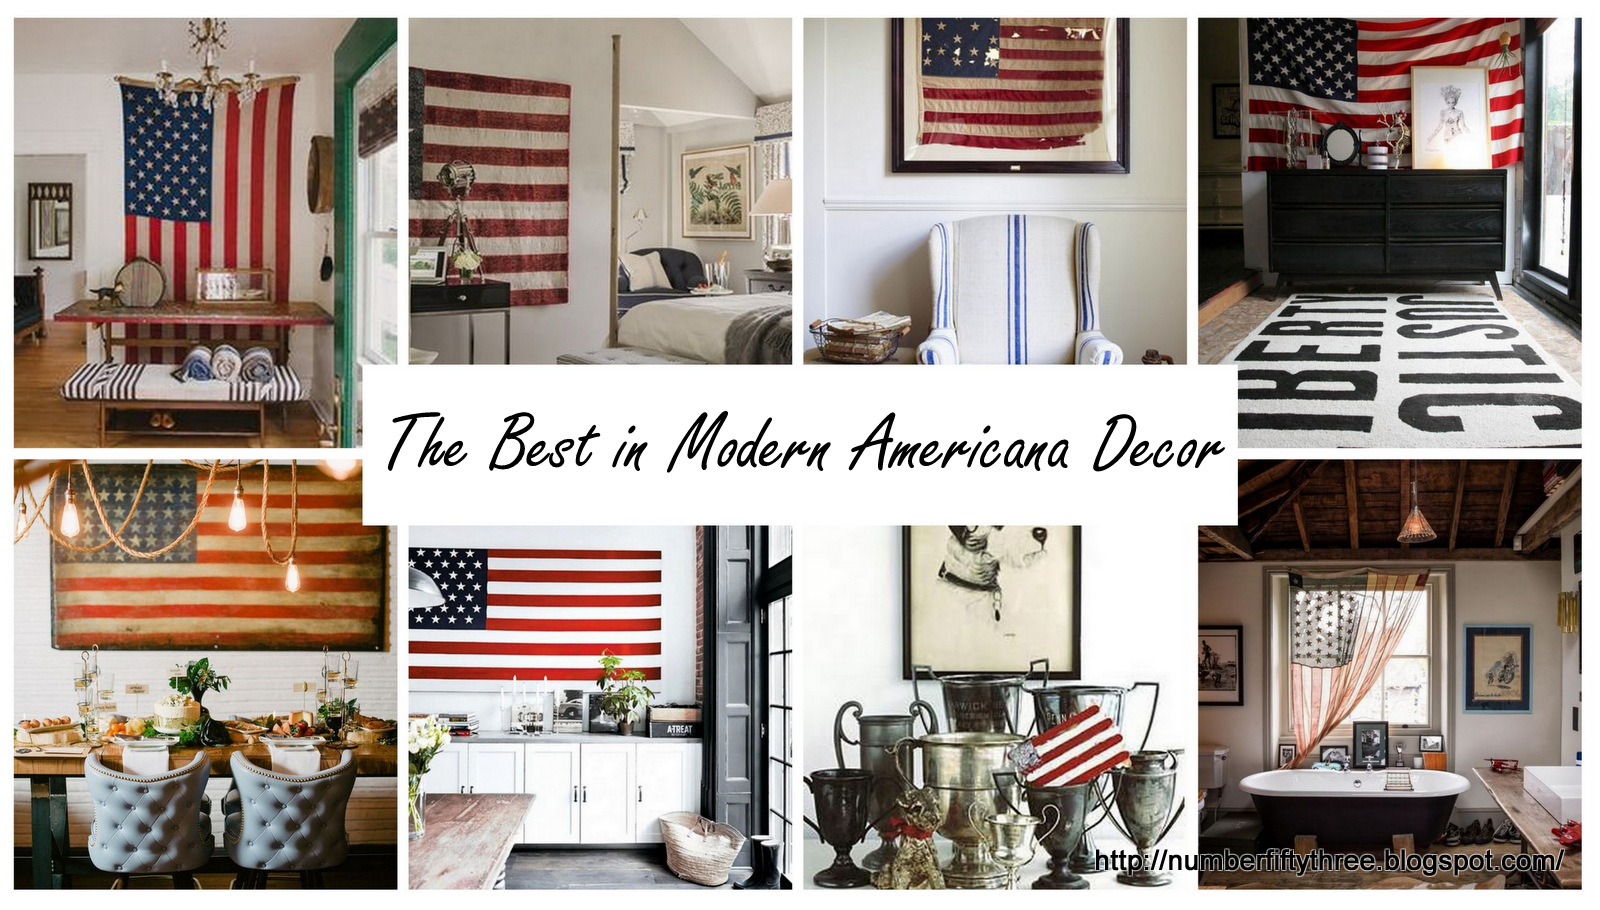 Number Fifty-Three: The Best in Modern Americana Decor